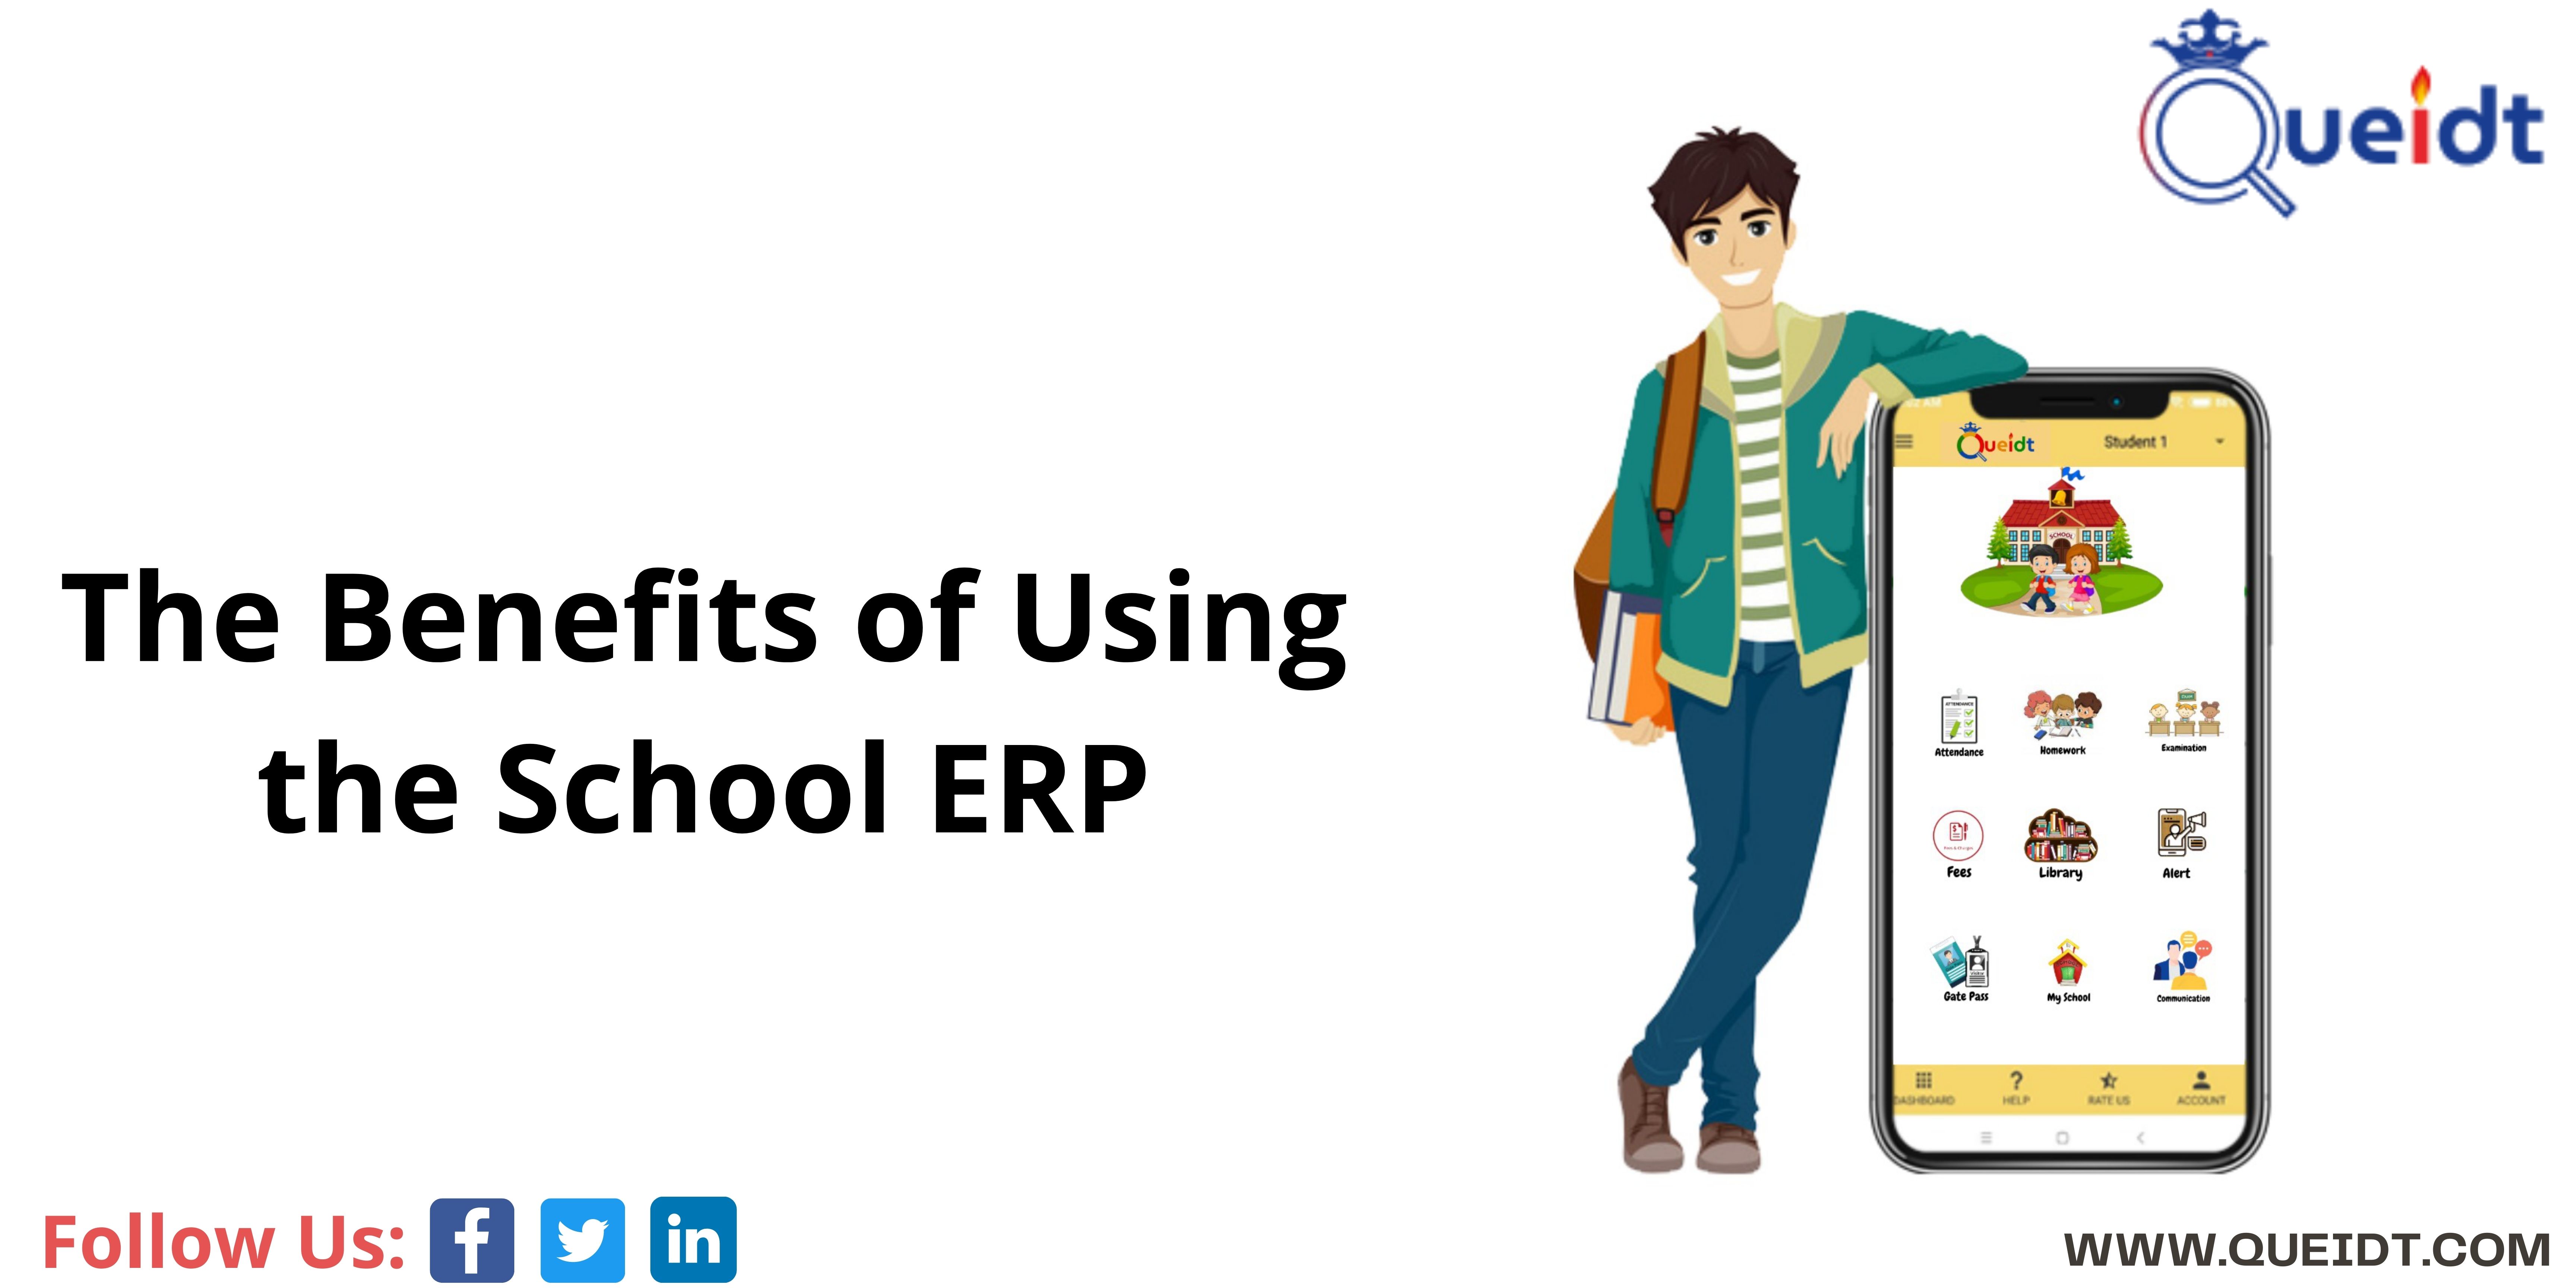 The Benefits of Using the School ERP